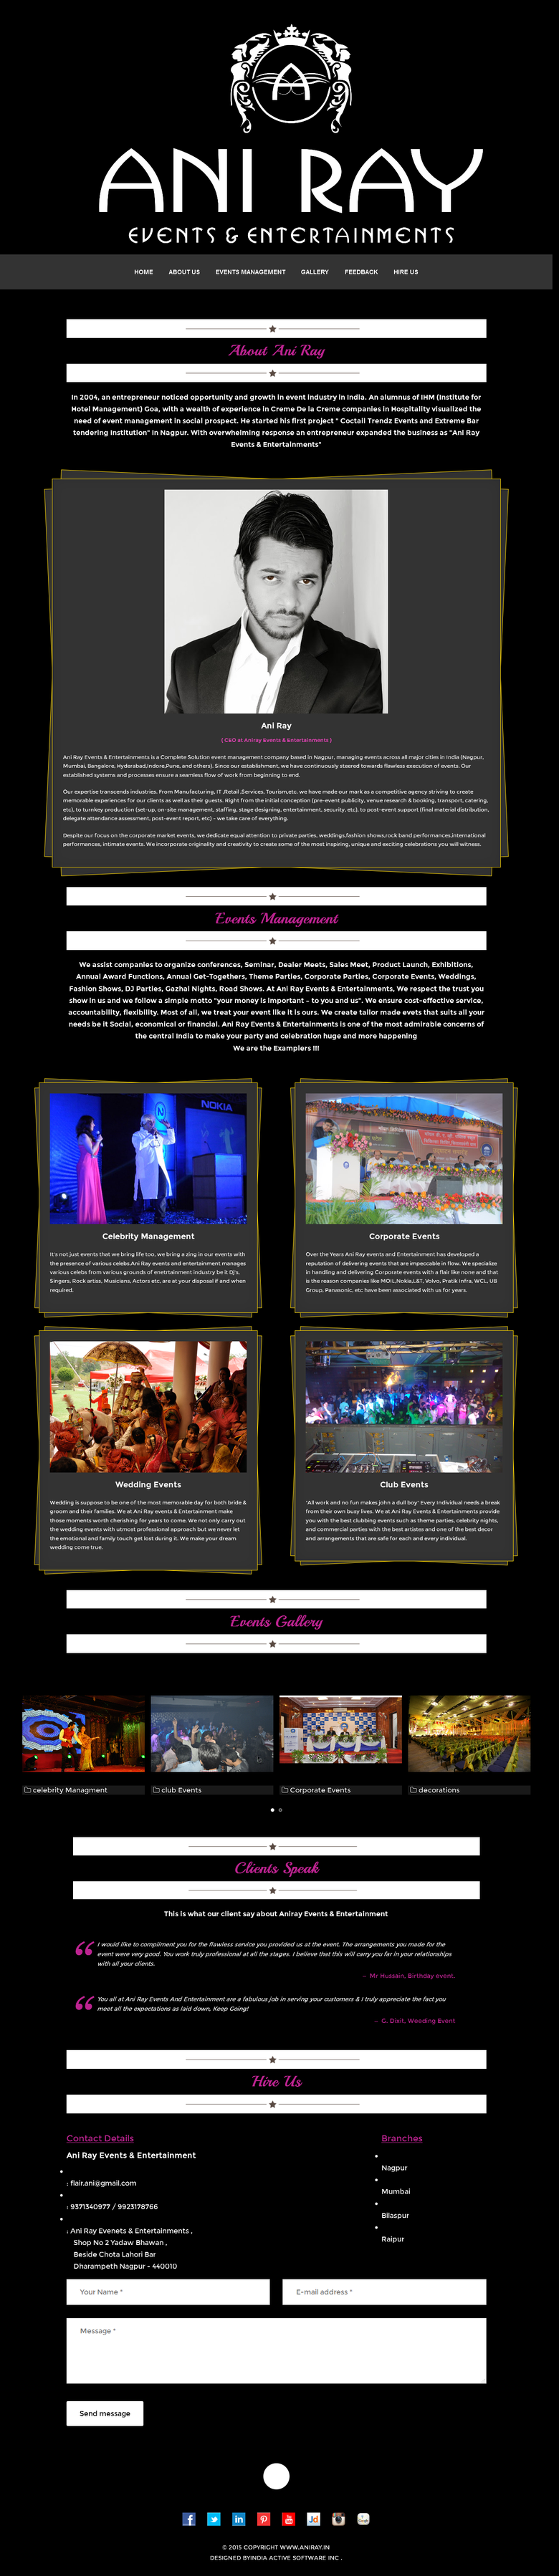 Aniray Events and Entertainment (http://www.aniray.in)